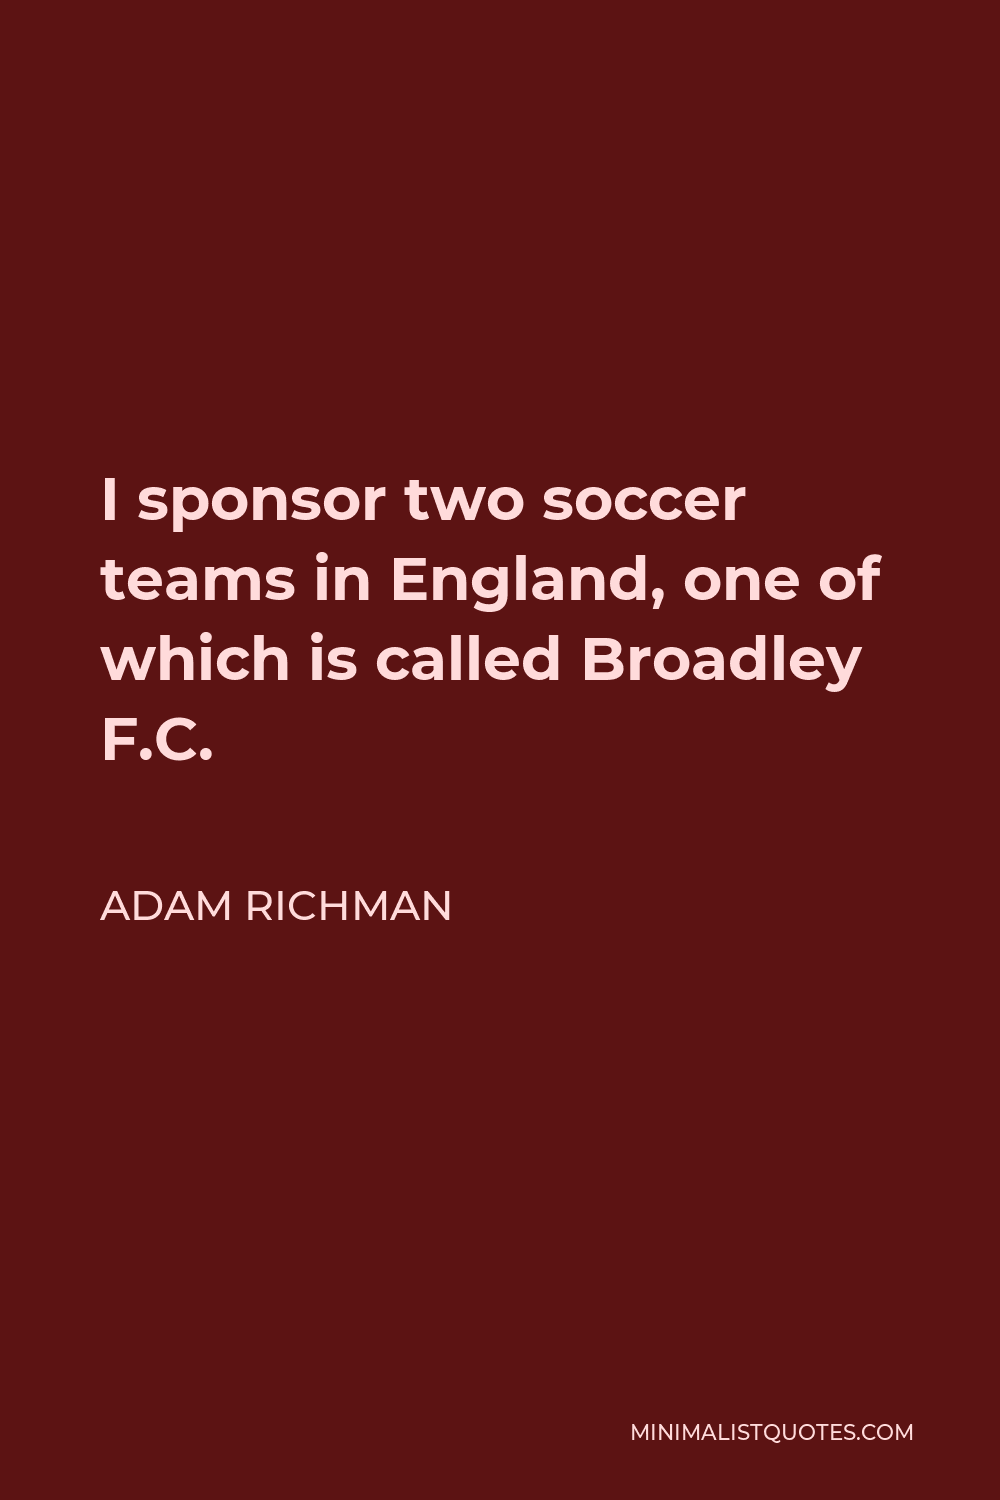 Adam Richman Quote - I sponsor two soccer teams in England, one of which is called Broadley F.C.